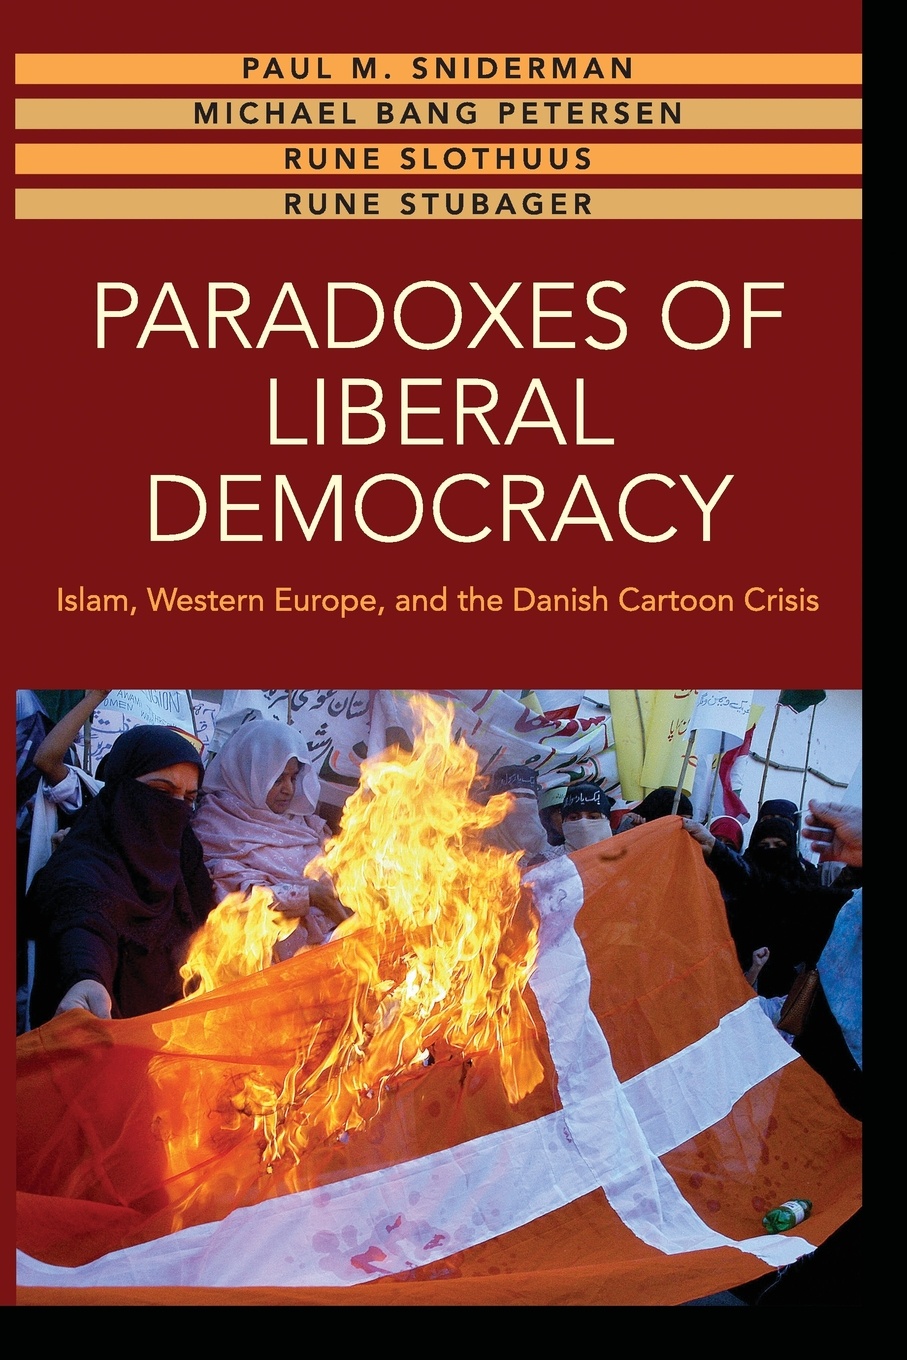 Paradoxes of Liberal Democracy. Islam, Western Europe, and the Danish Cartoon Crisis